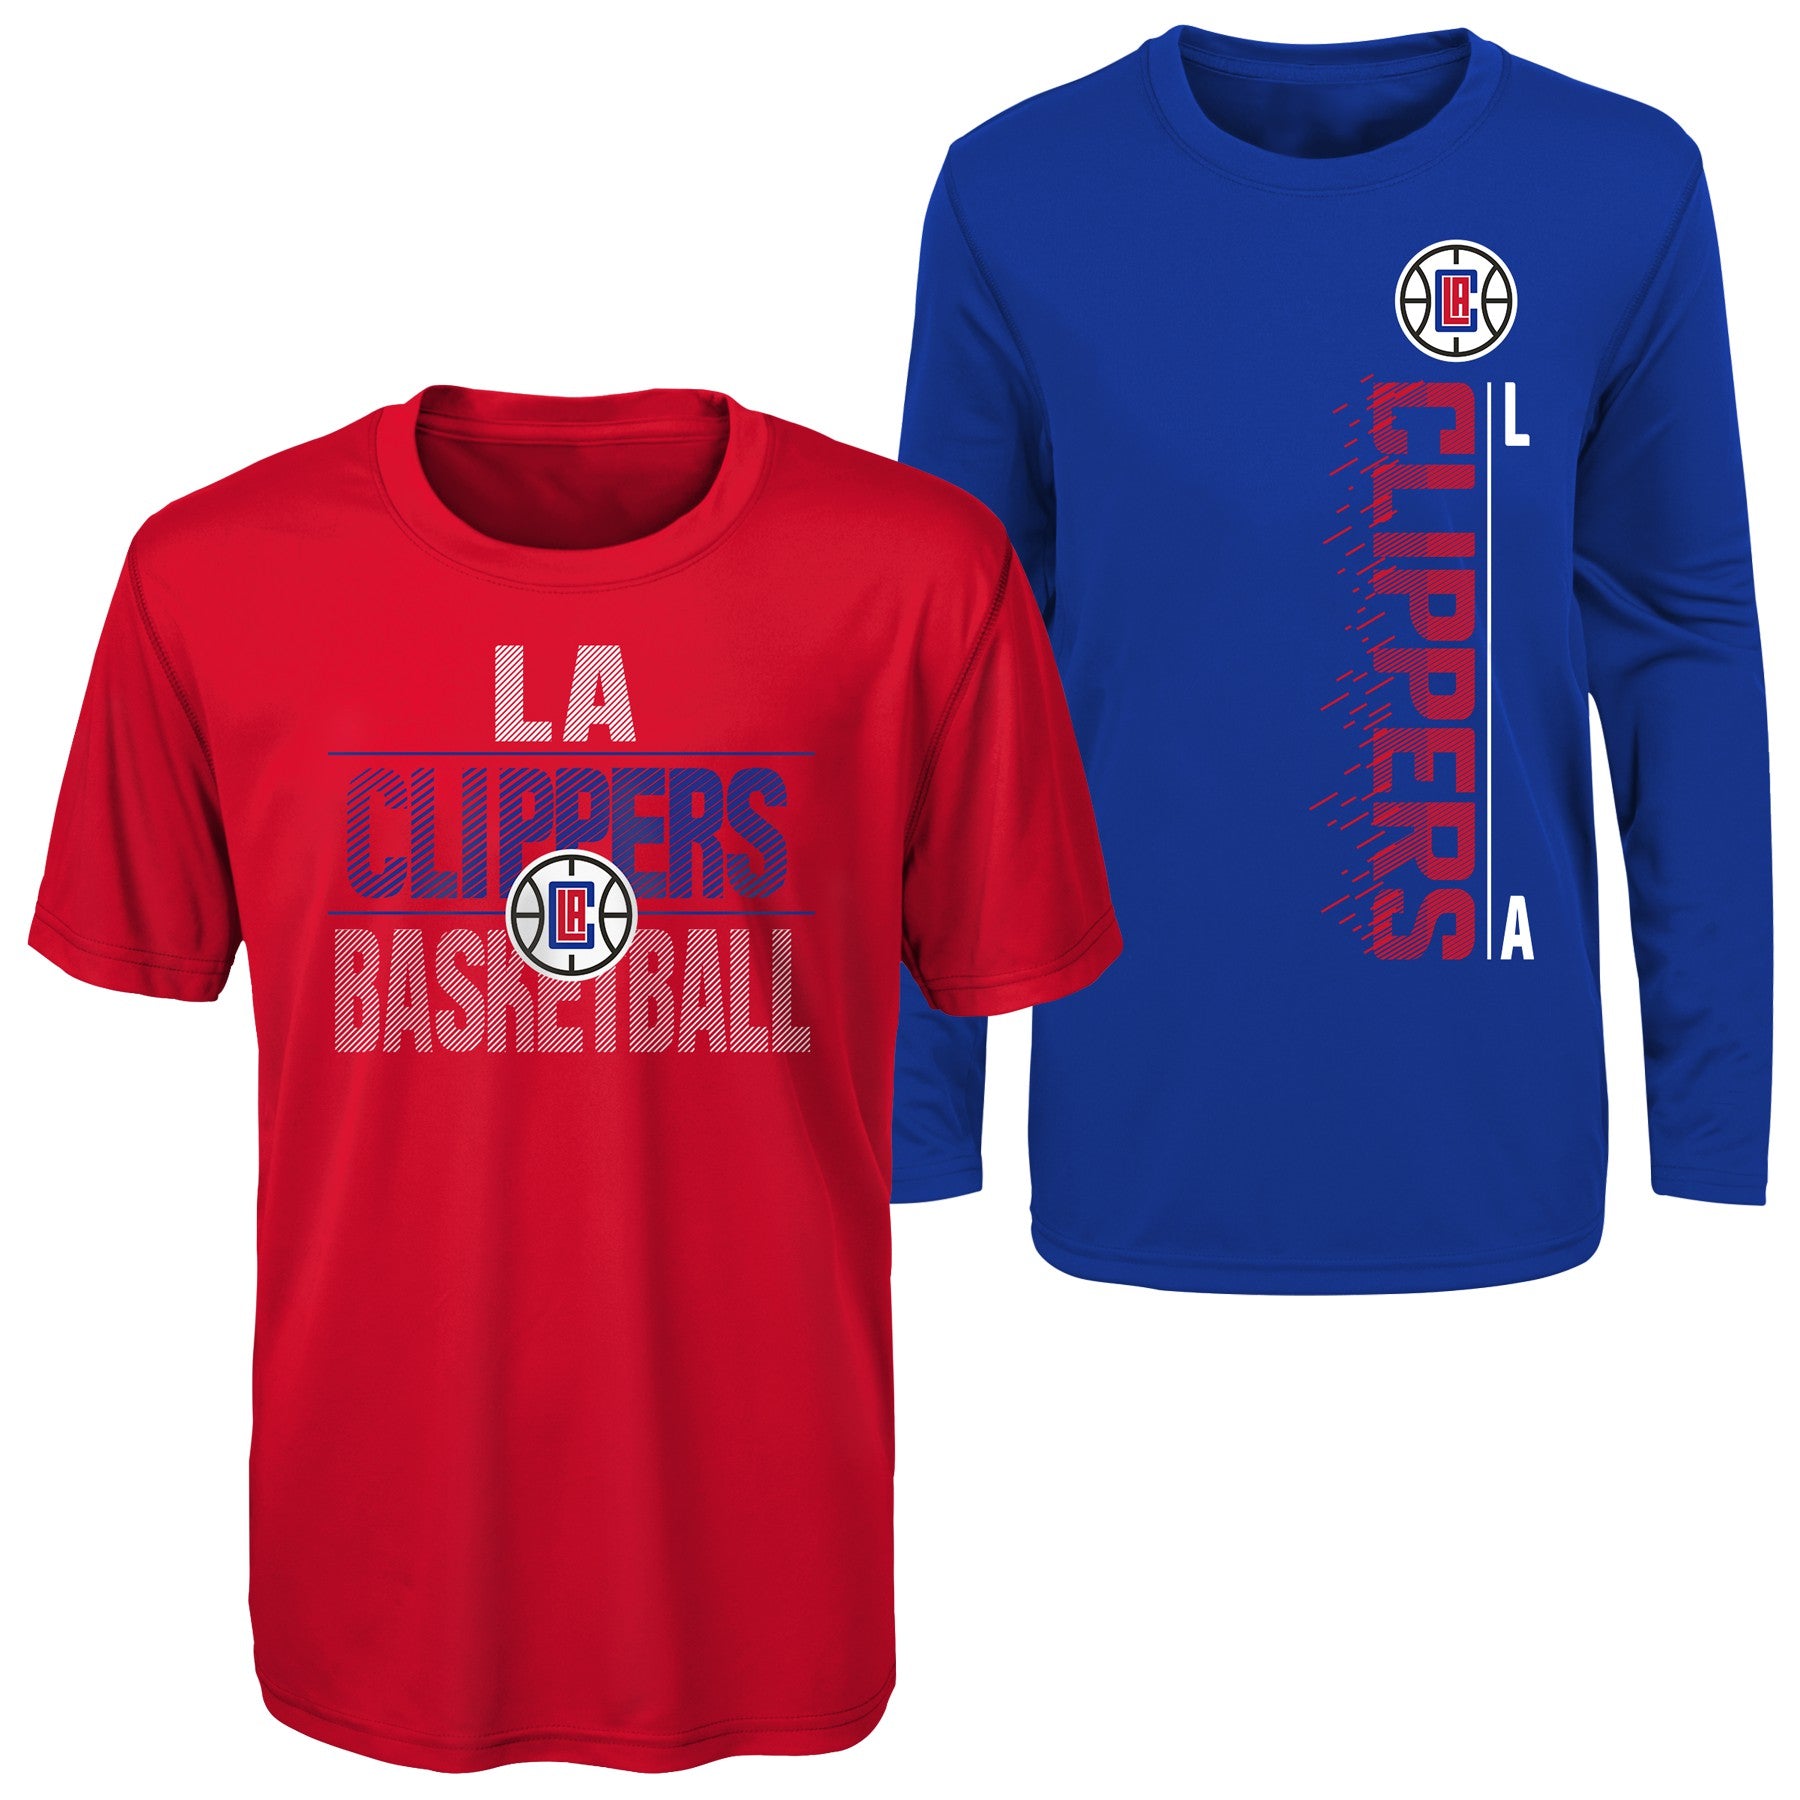 Outerstuff NBA Youth (8-20) Los Angeles Clippers Performance Long & Sh –  Fanletic